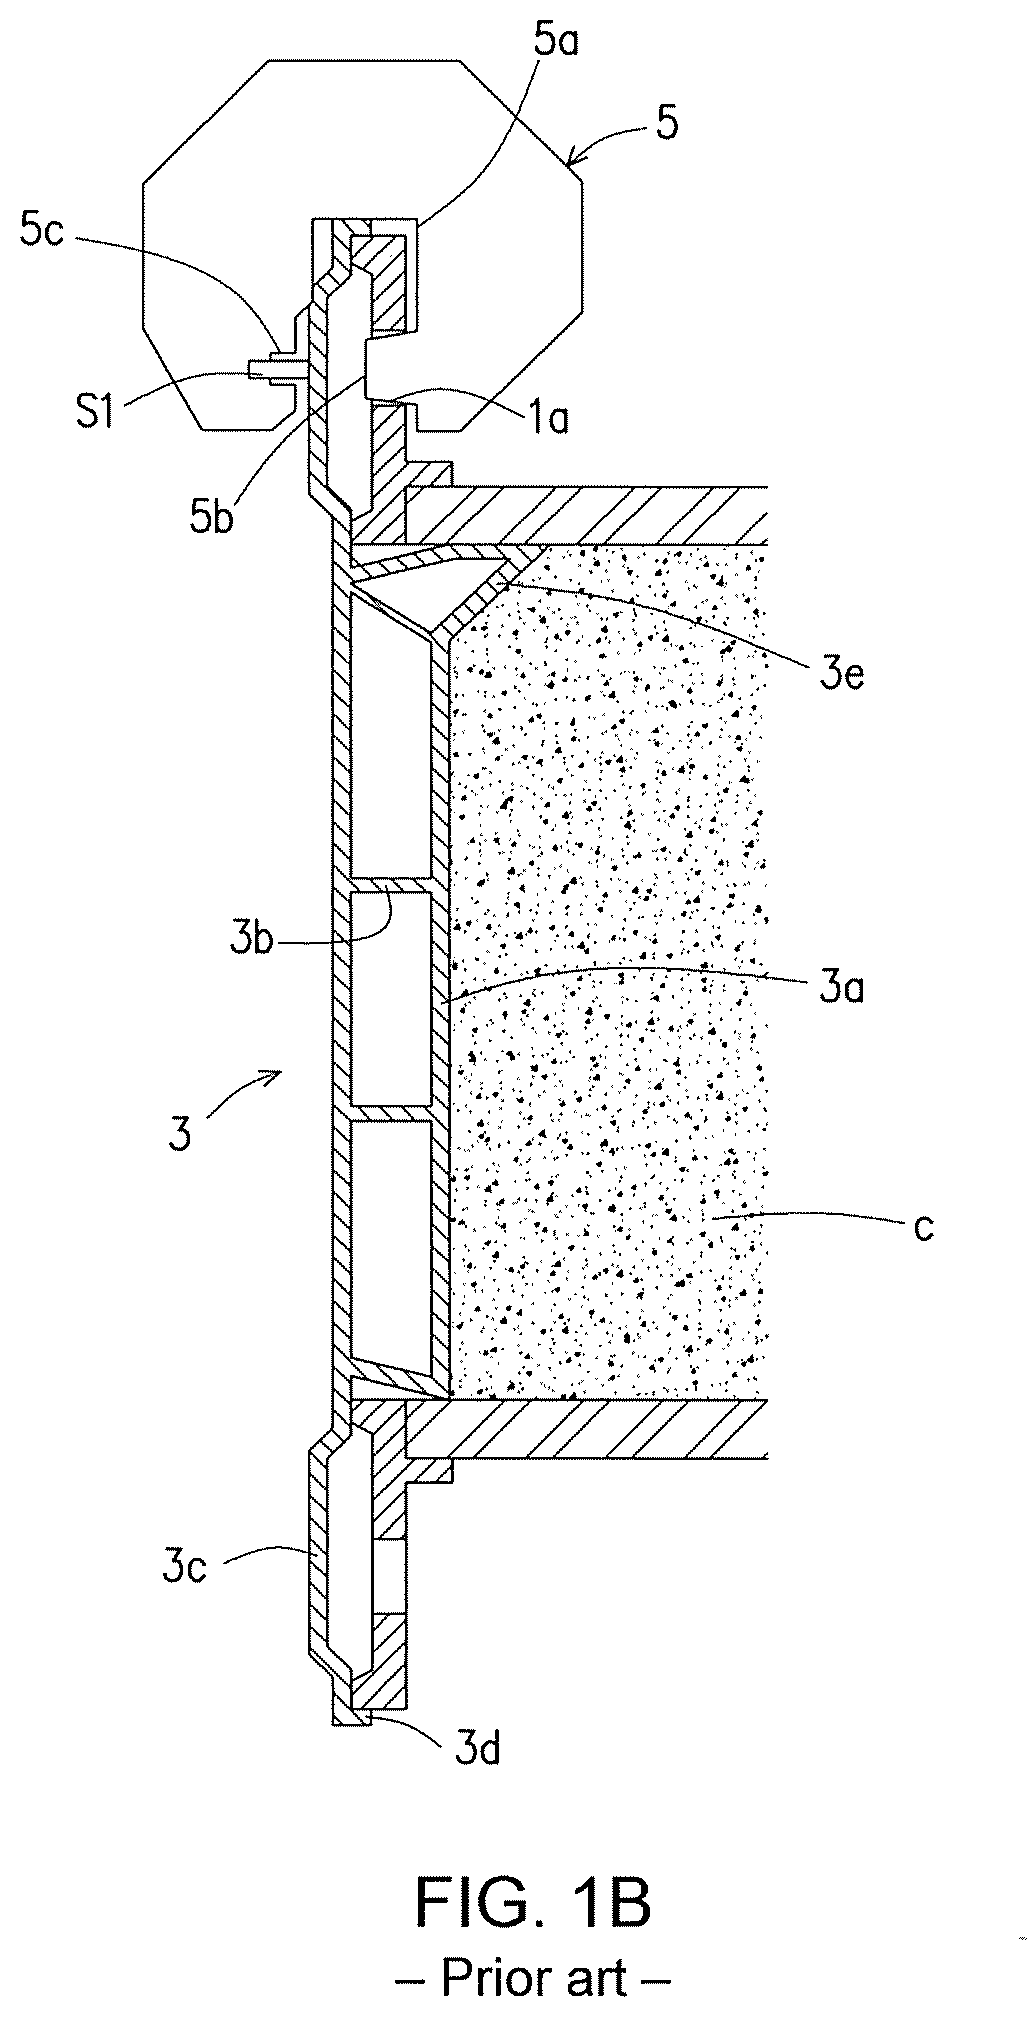 Self-pouring mold system and method of fire-proofing, repairing, and reinforcing using the same